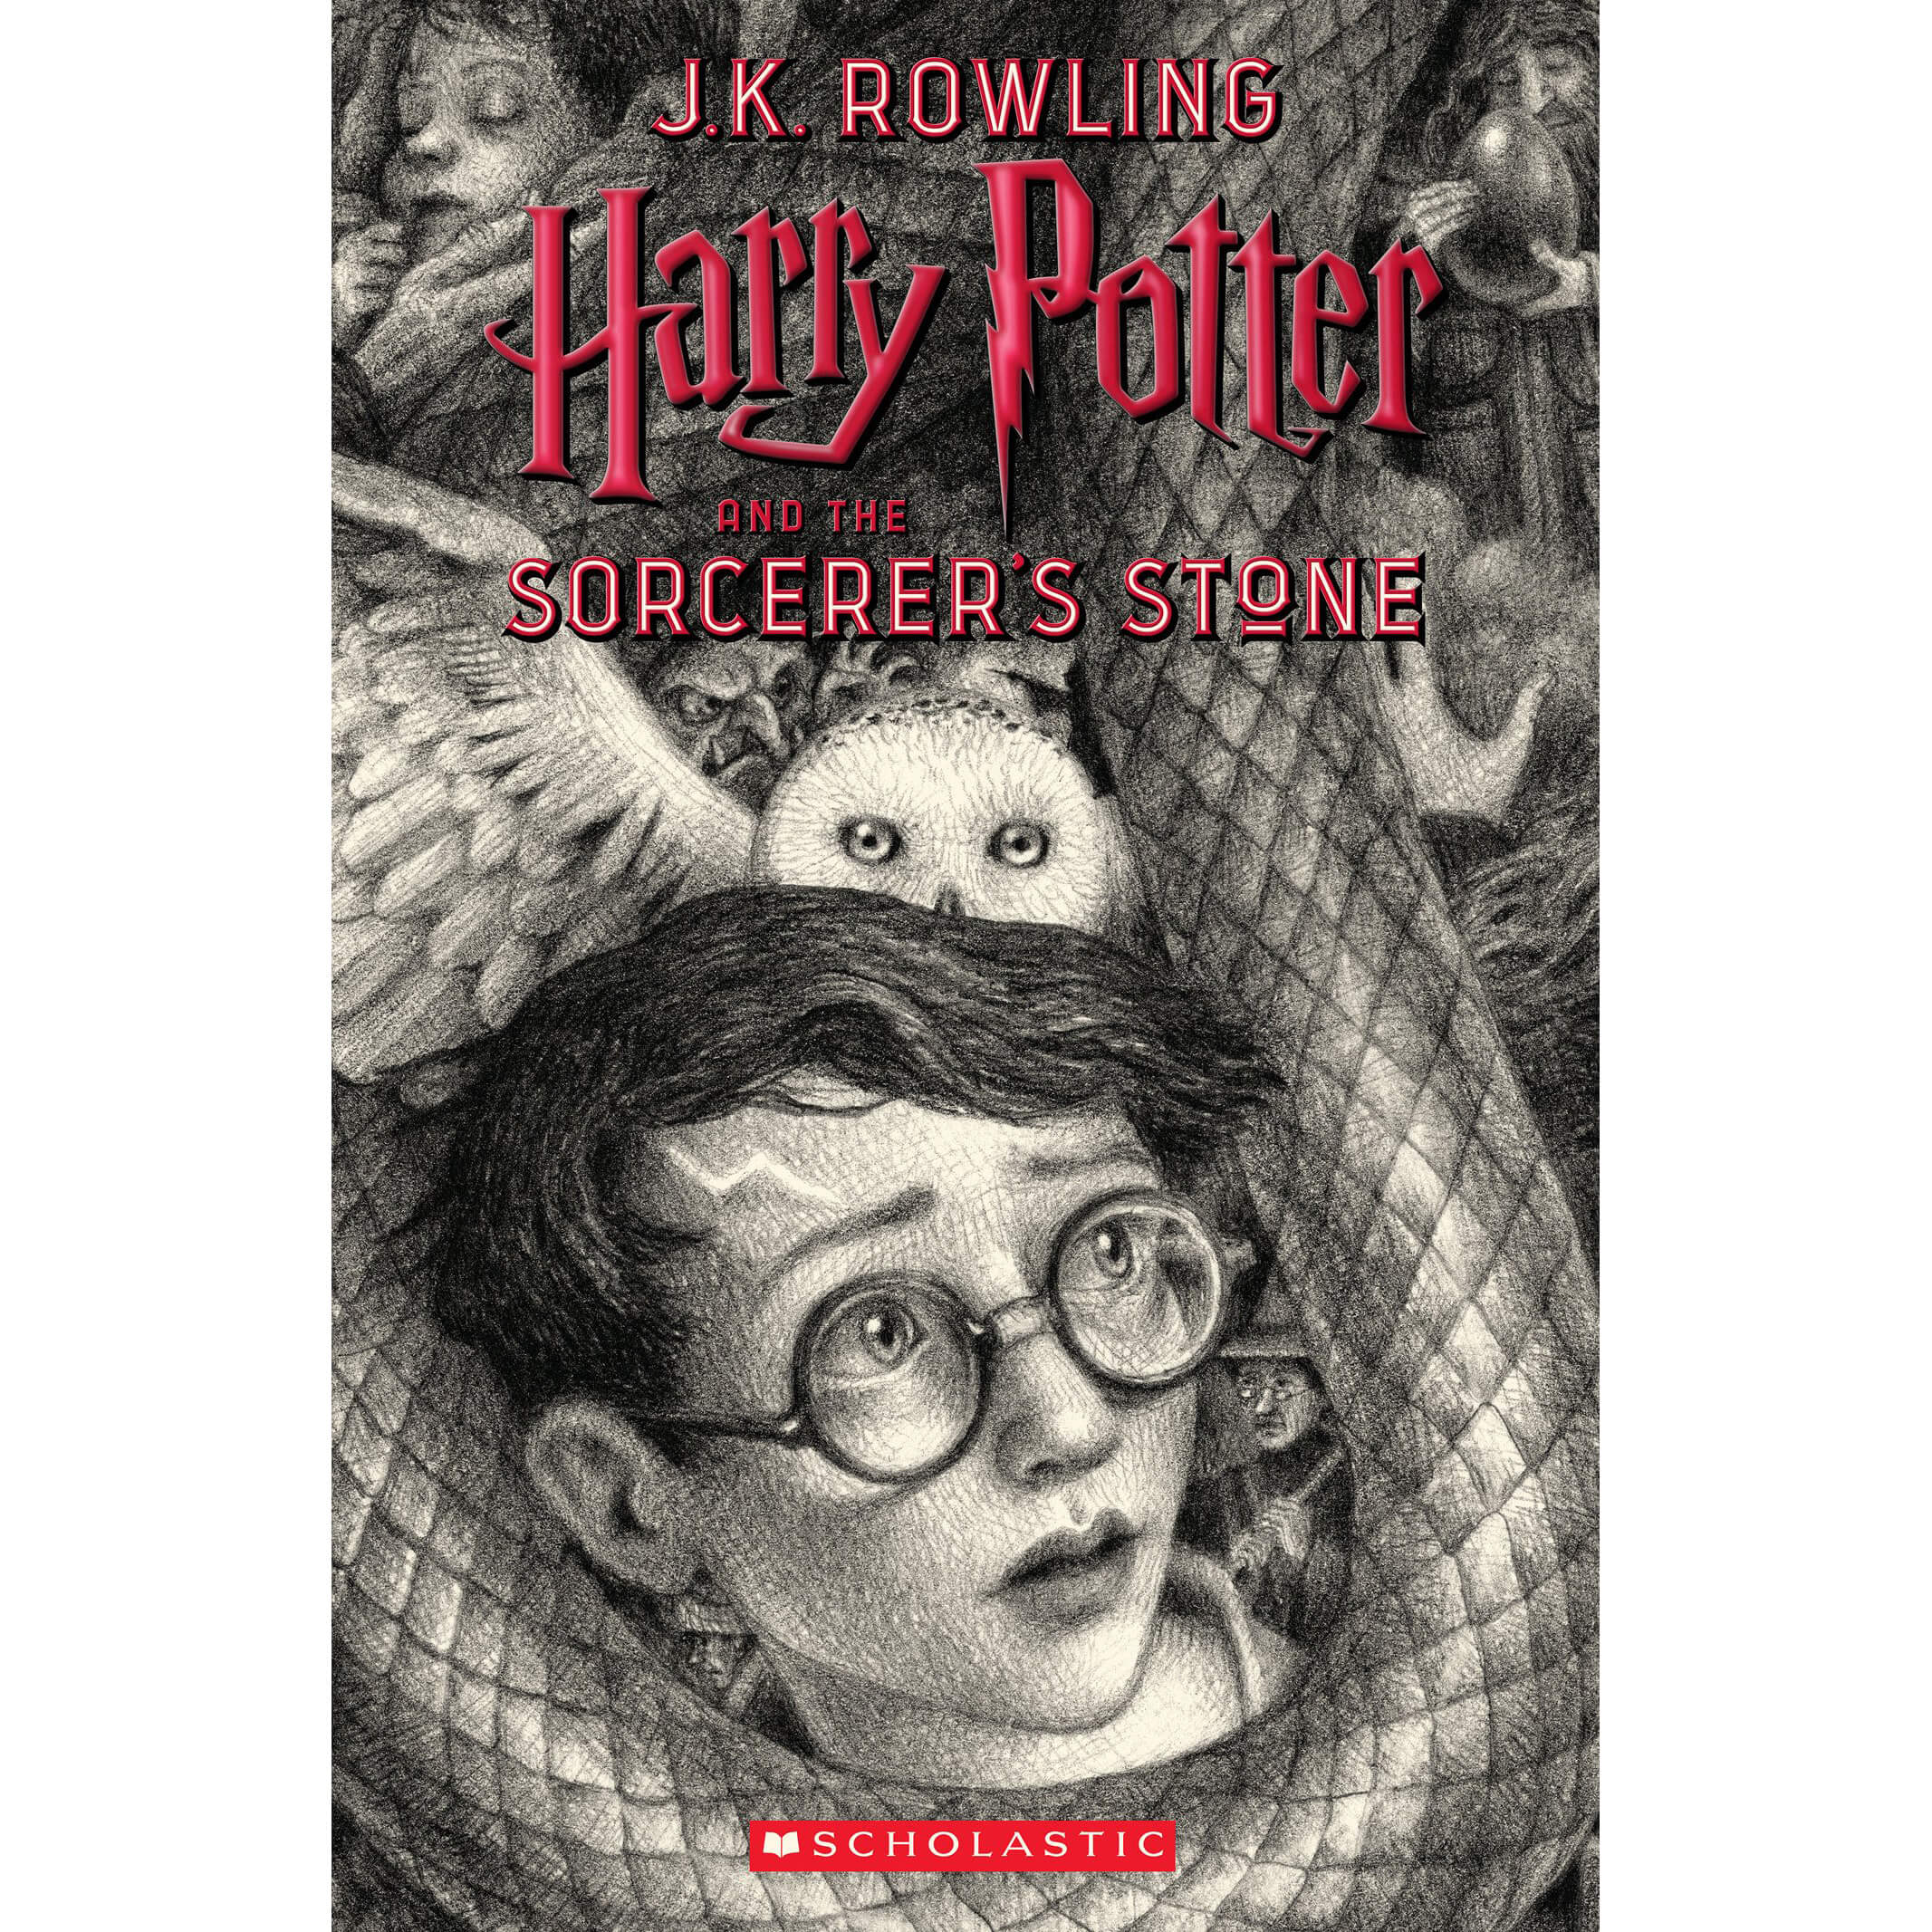 Harry Potter and the Sorcerer's Stone 20th Anniversary Edition